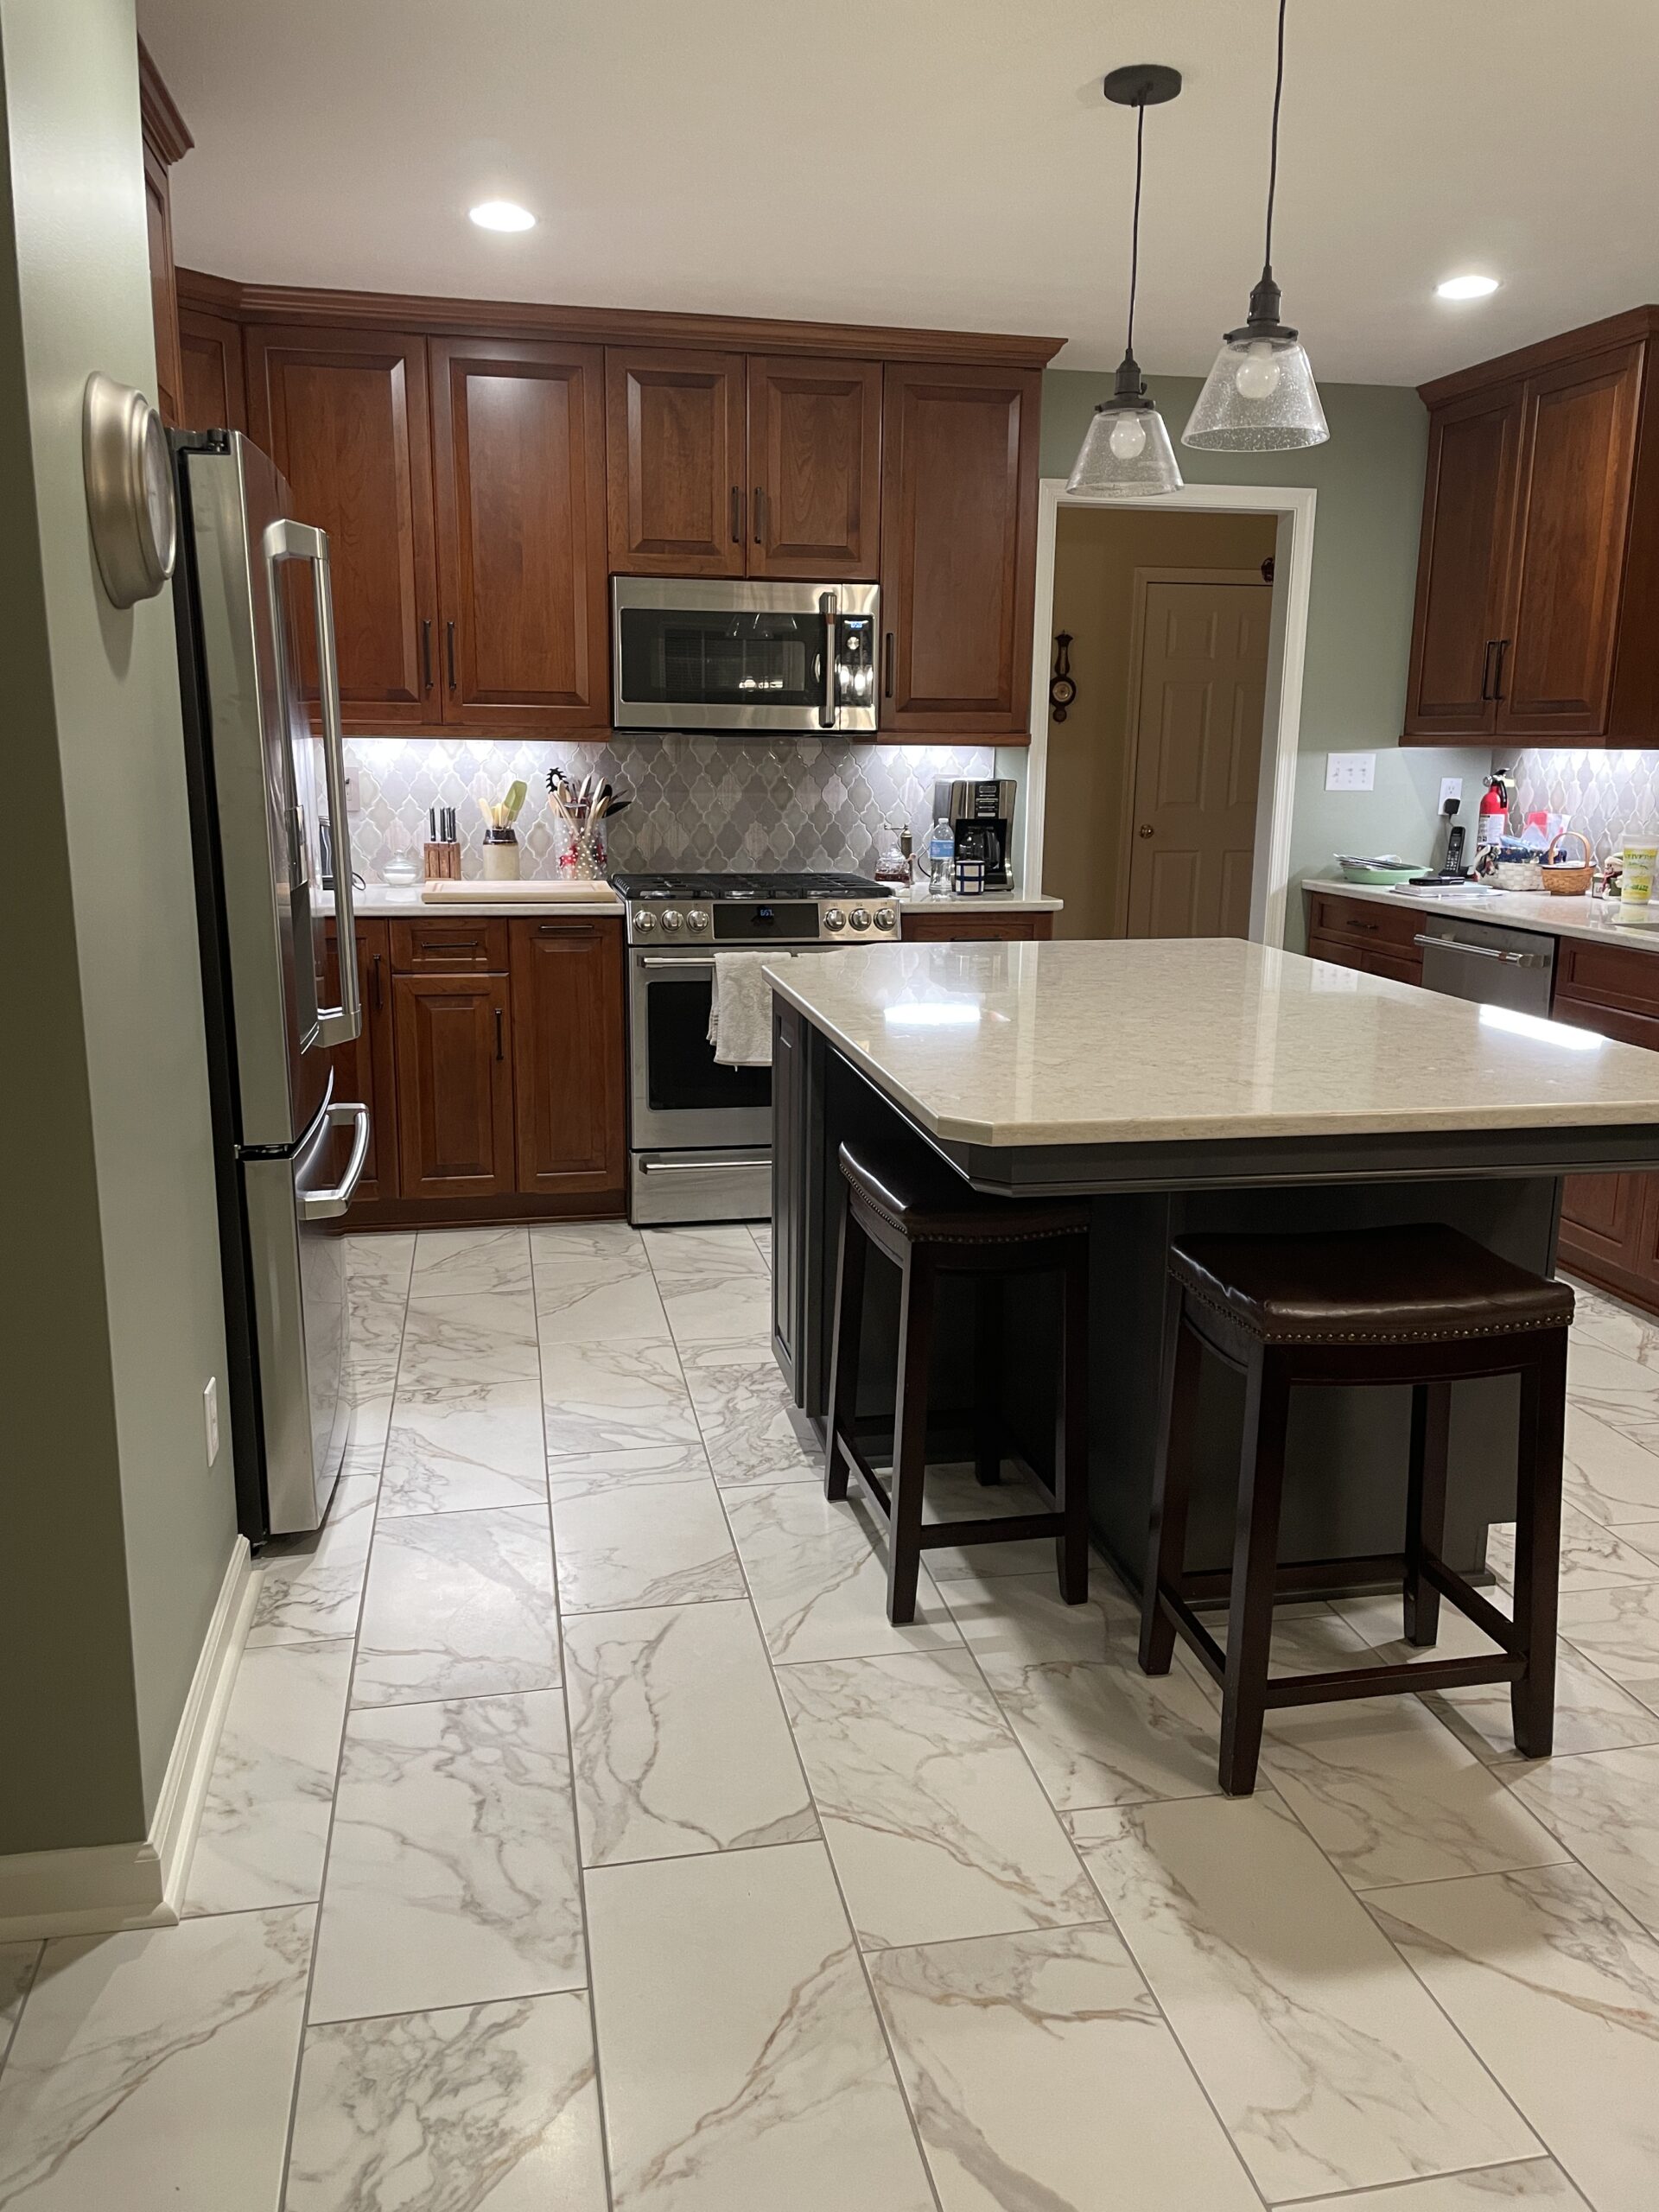 Classic kitchen, center table with white marble countertop, brown cabinets and storage, arabesque tile backsplash, black and white floor tiles